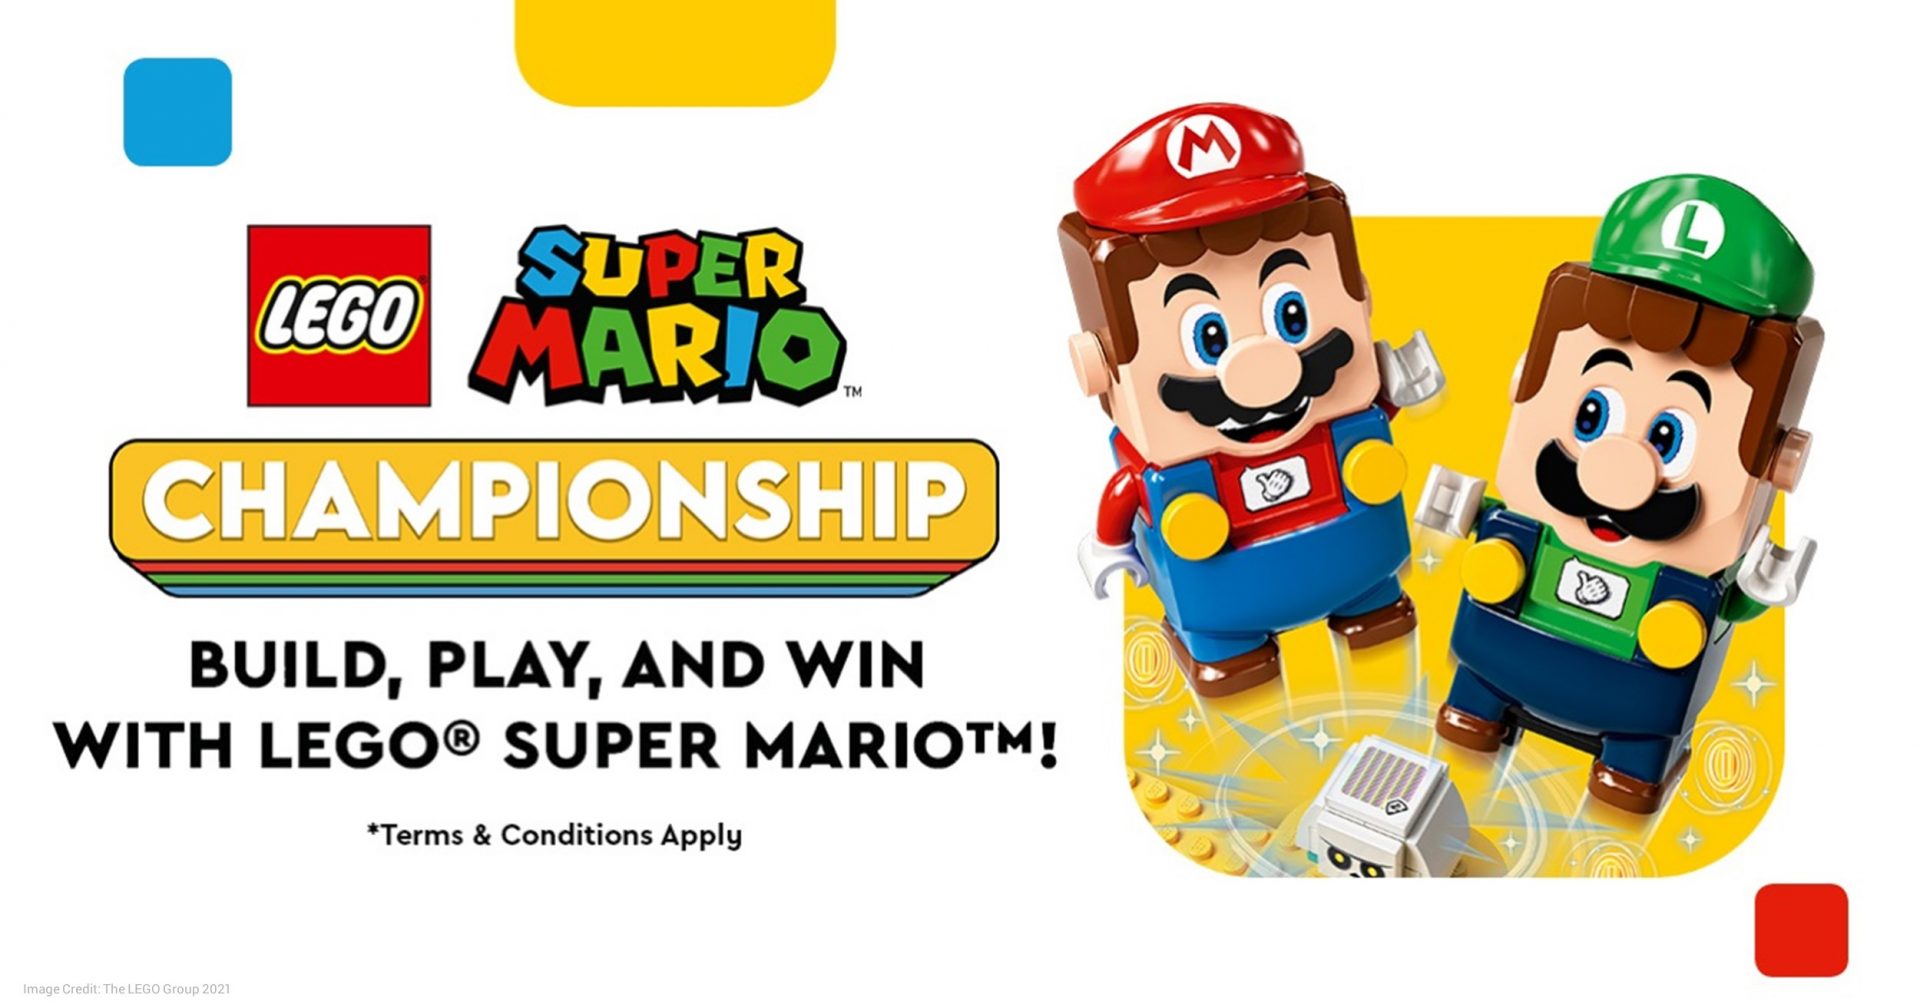 The LEGO Group Brings 2-player Action to the LEGO(R) Super Mario™ Universe